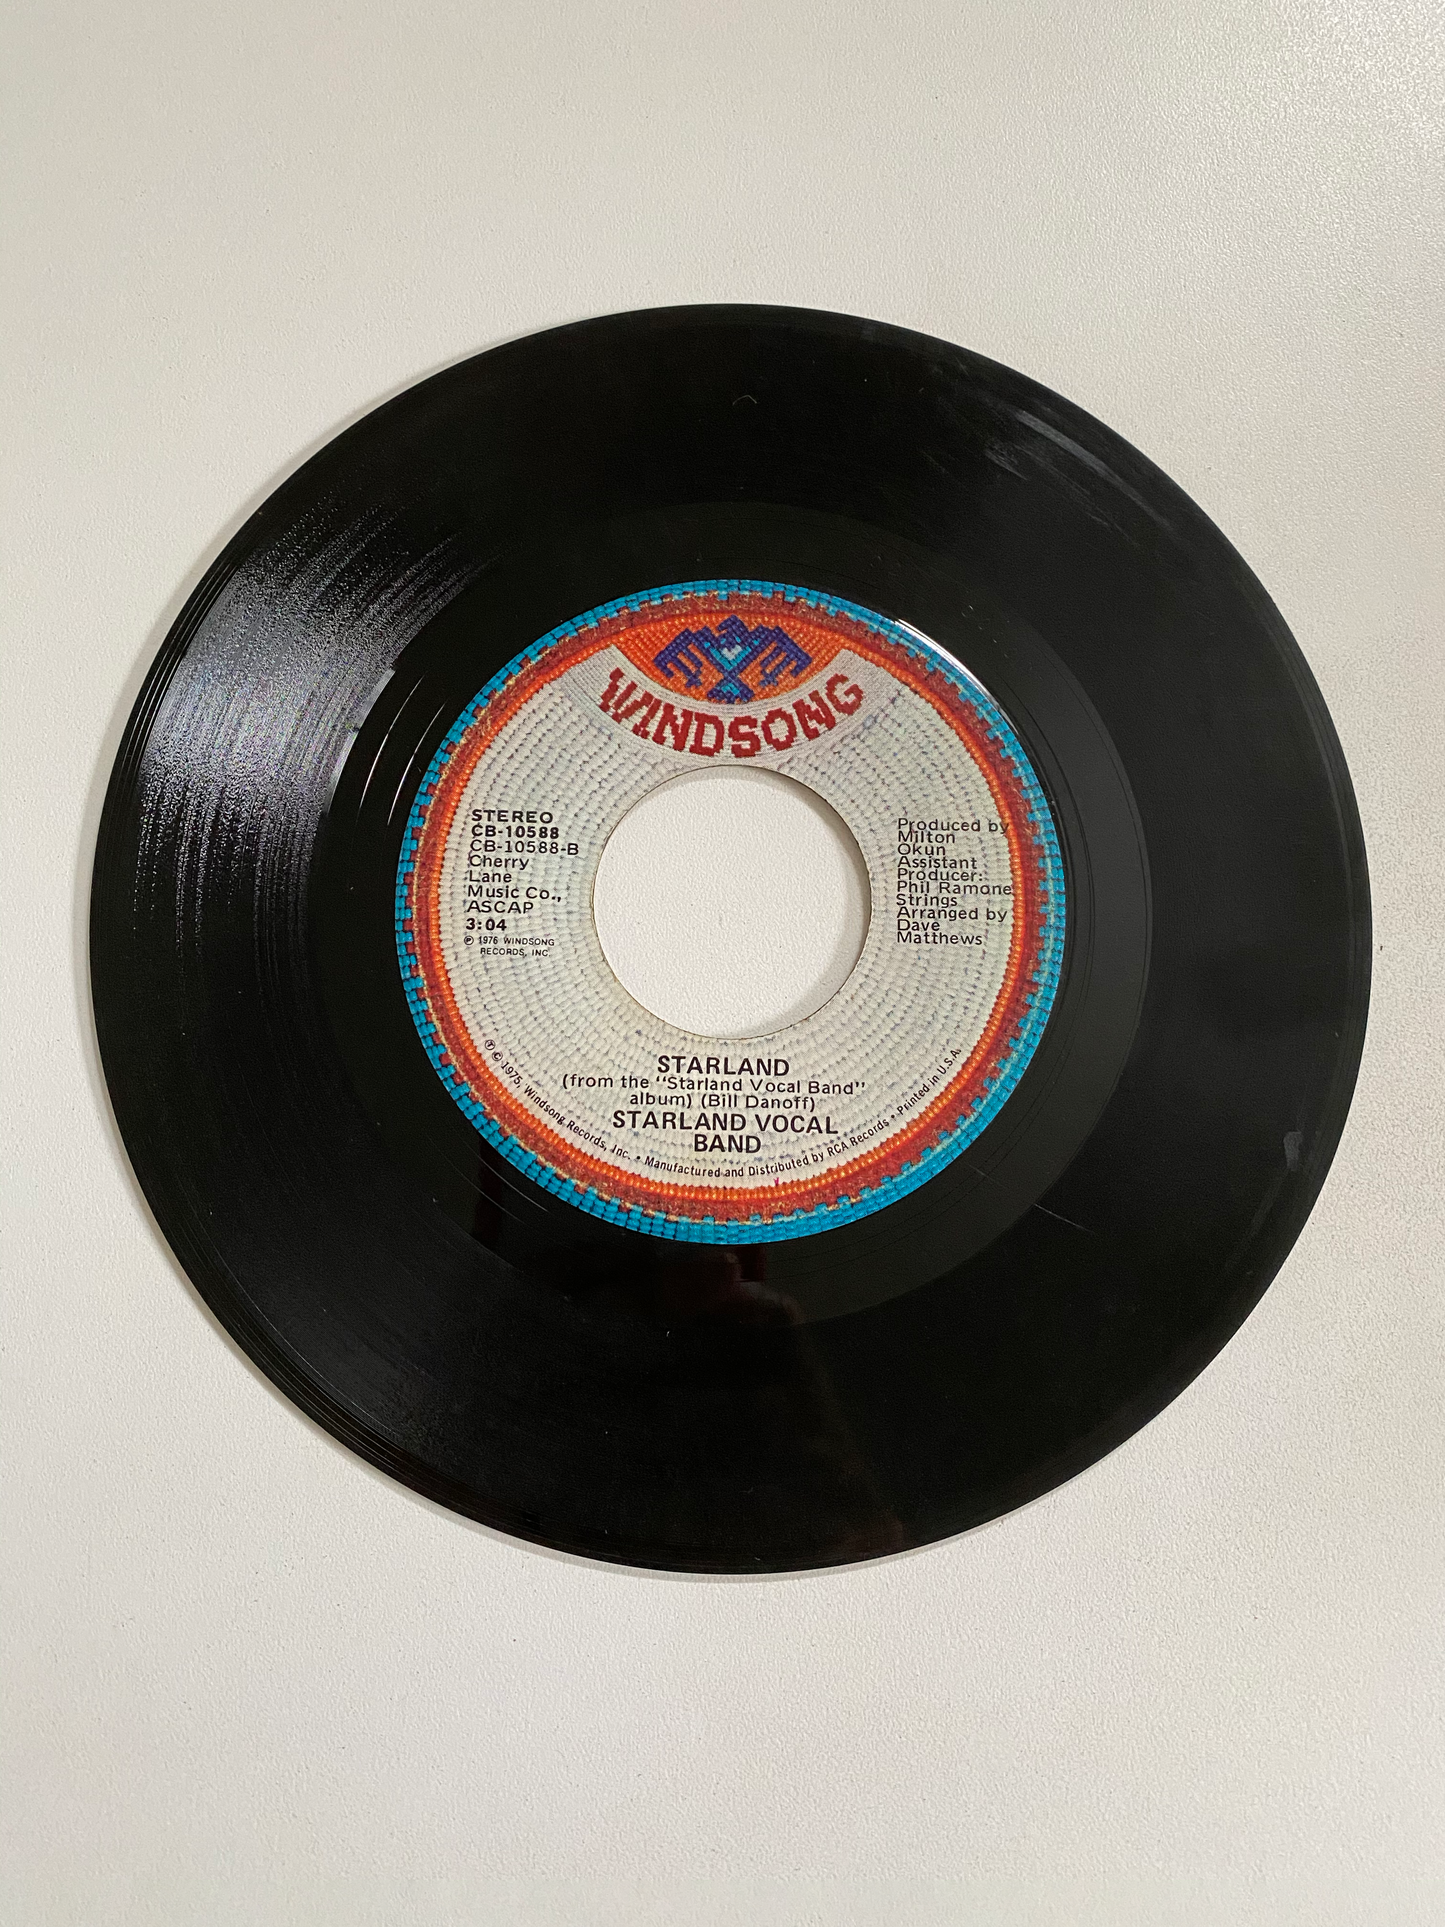 Starland Vocal Band - Afternoon Delight | 45 The Vintedge Co.